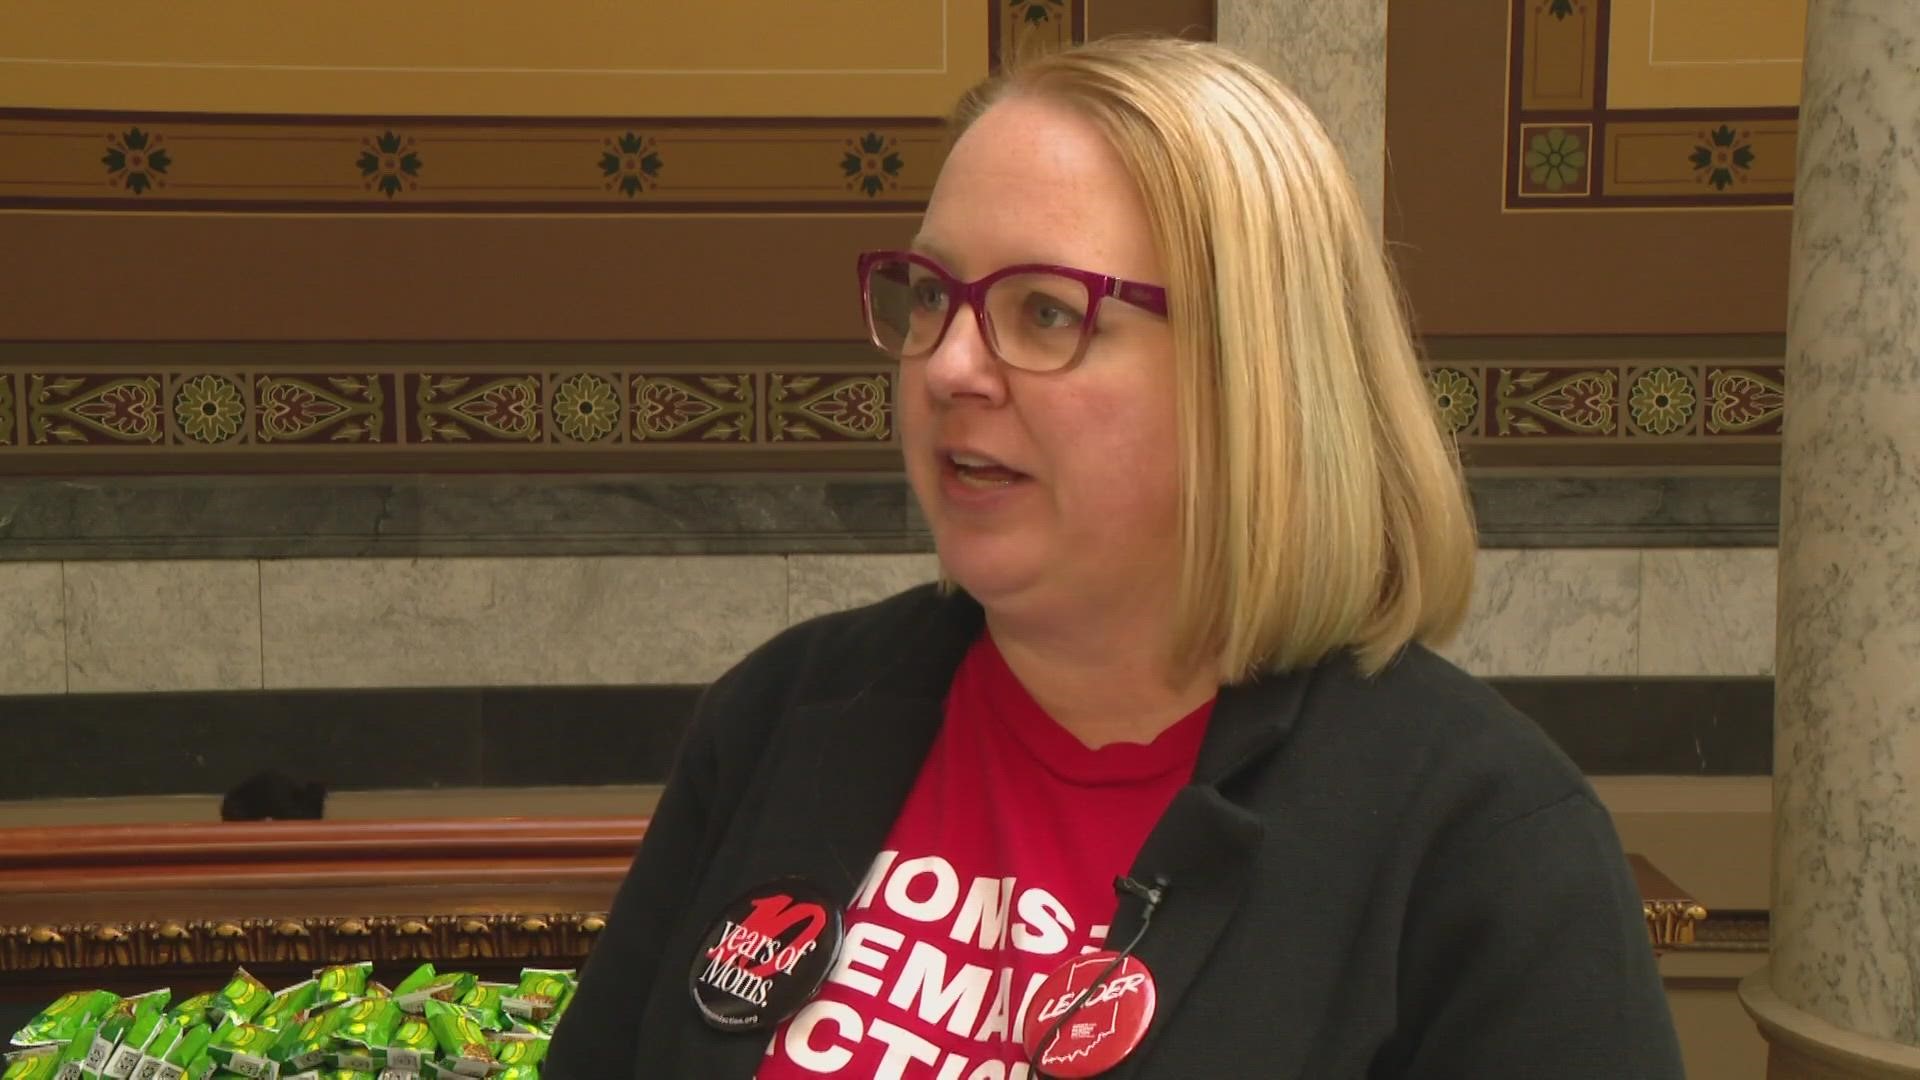 Emily Longnecker was at the Moms Demand Action rally, a national grassroots gun safety group founded by an Indiana mom.